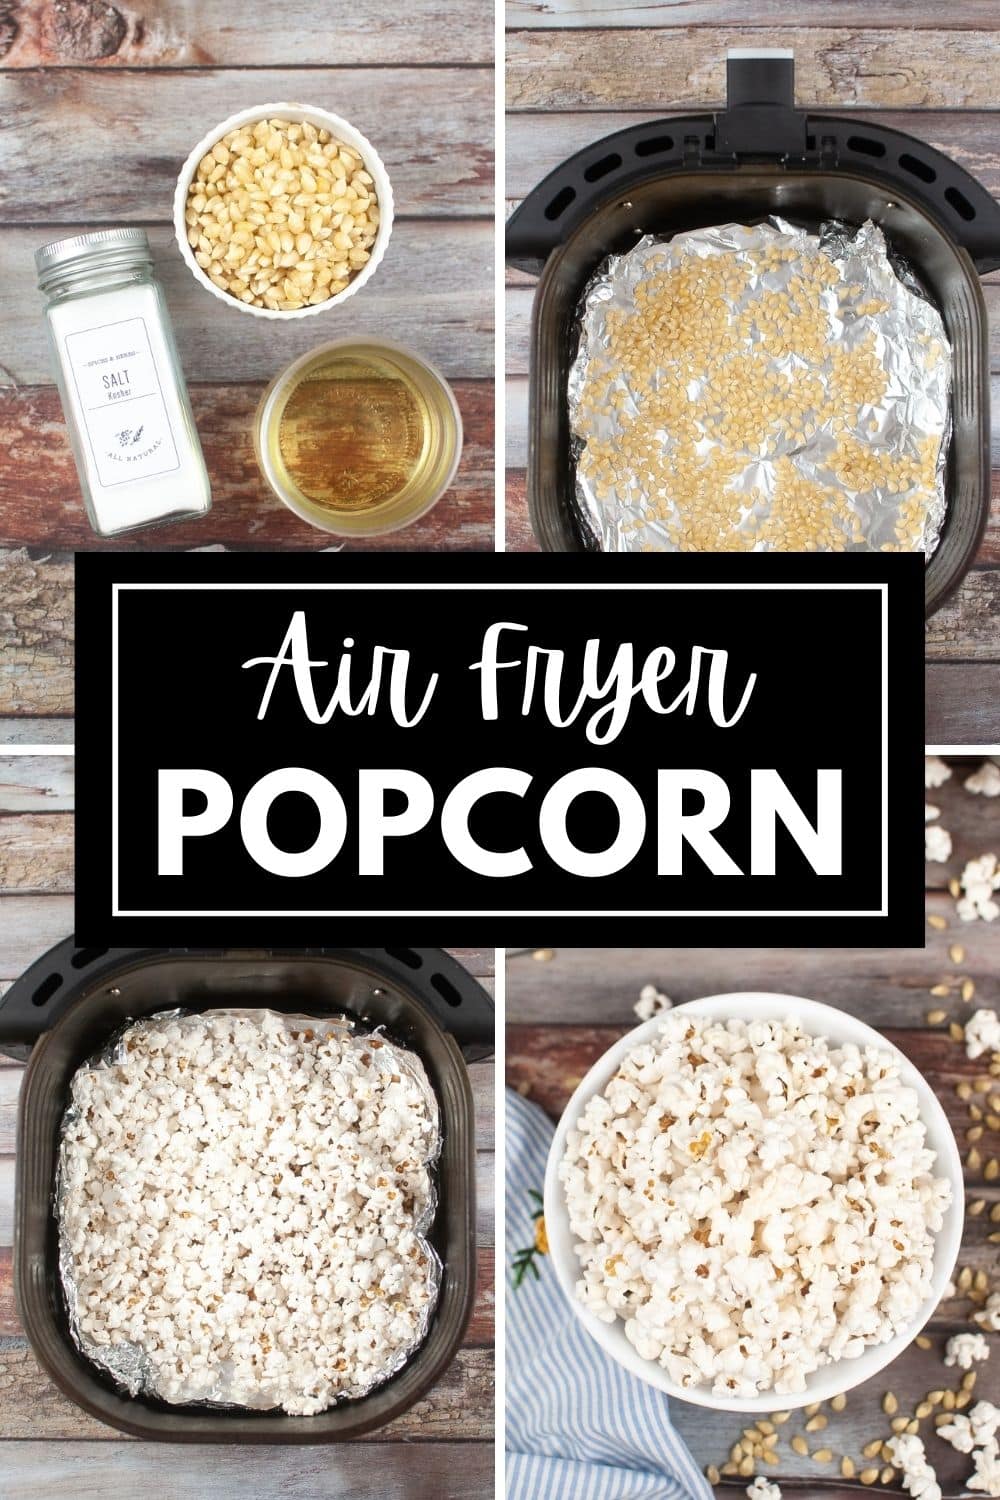 Step-by-step process for making air fryer popcorn, showcasing ingredients and the cooking progression.